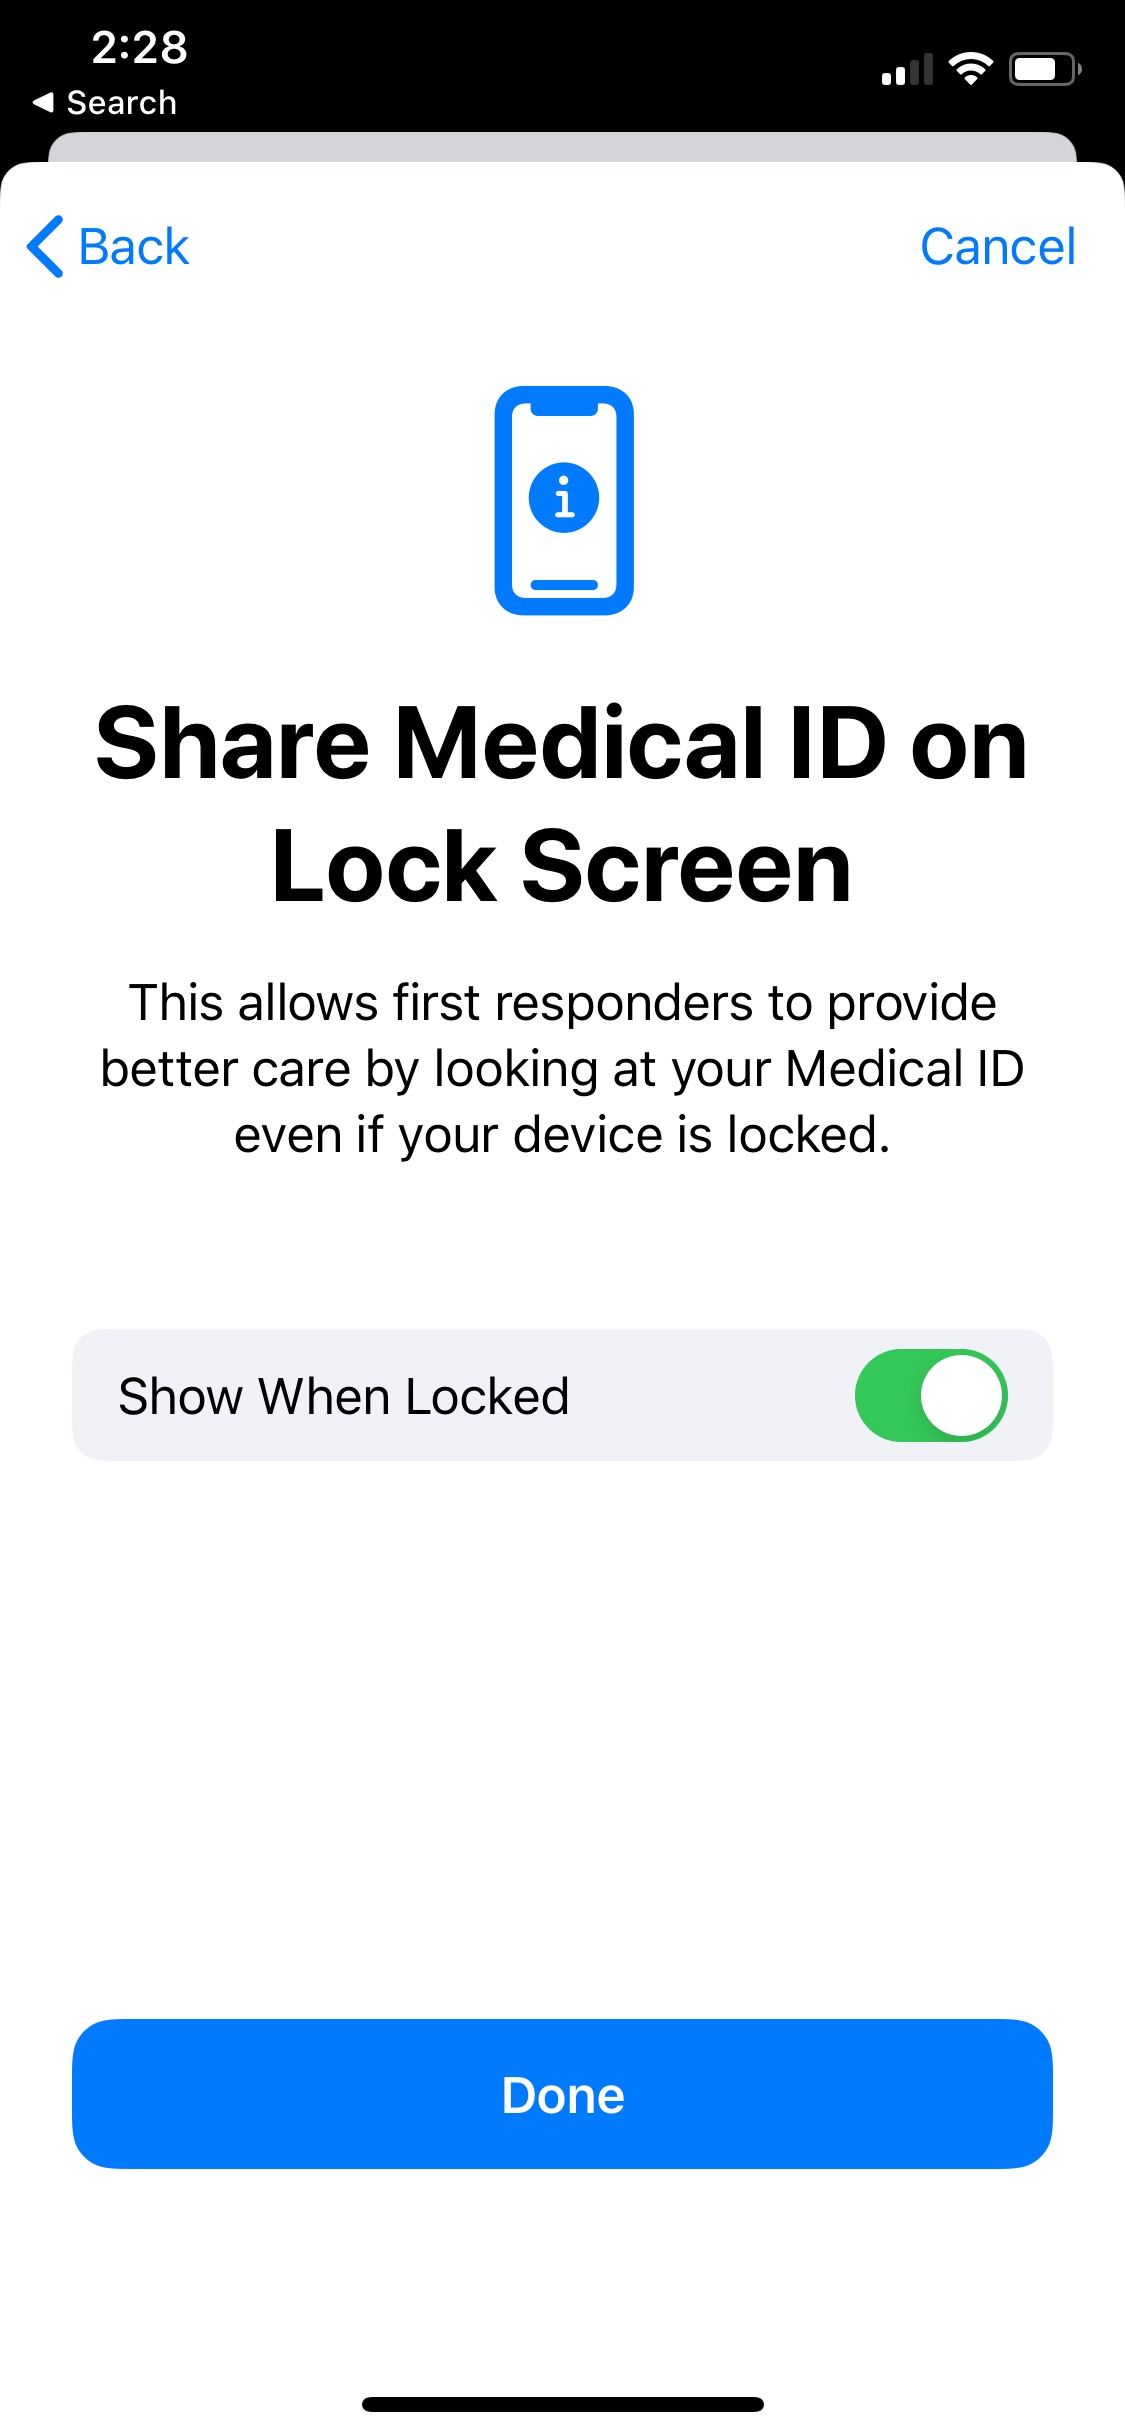 iOS 13.5 Beta 4 Lets You Automatically Share Medical ID Information During an Emergency Call